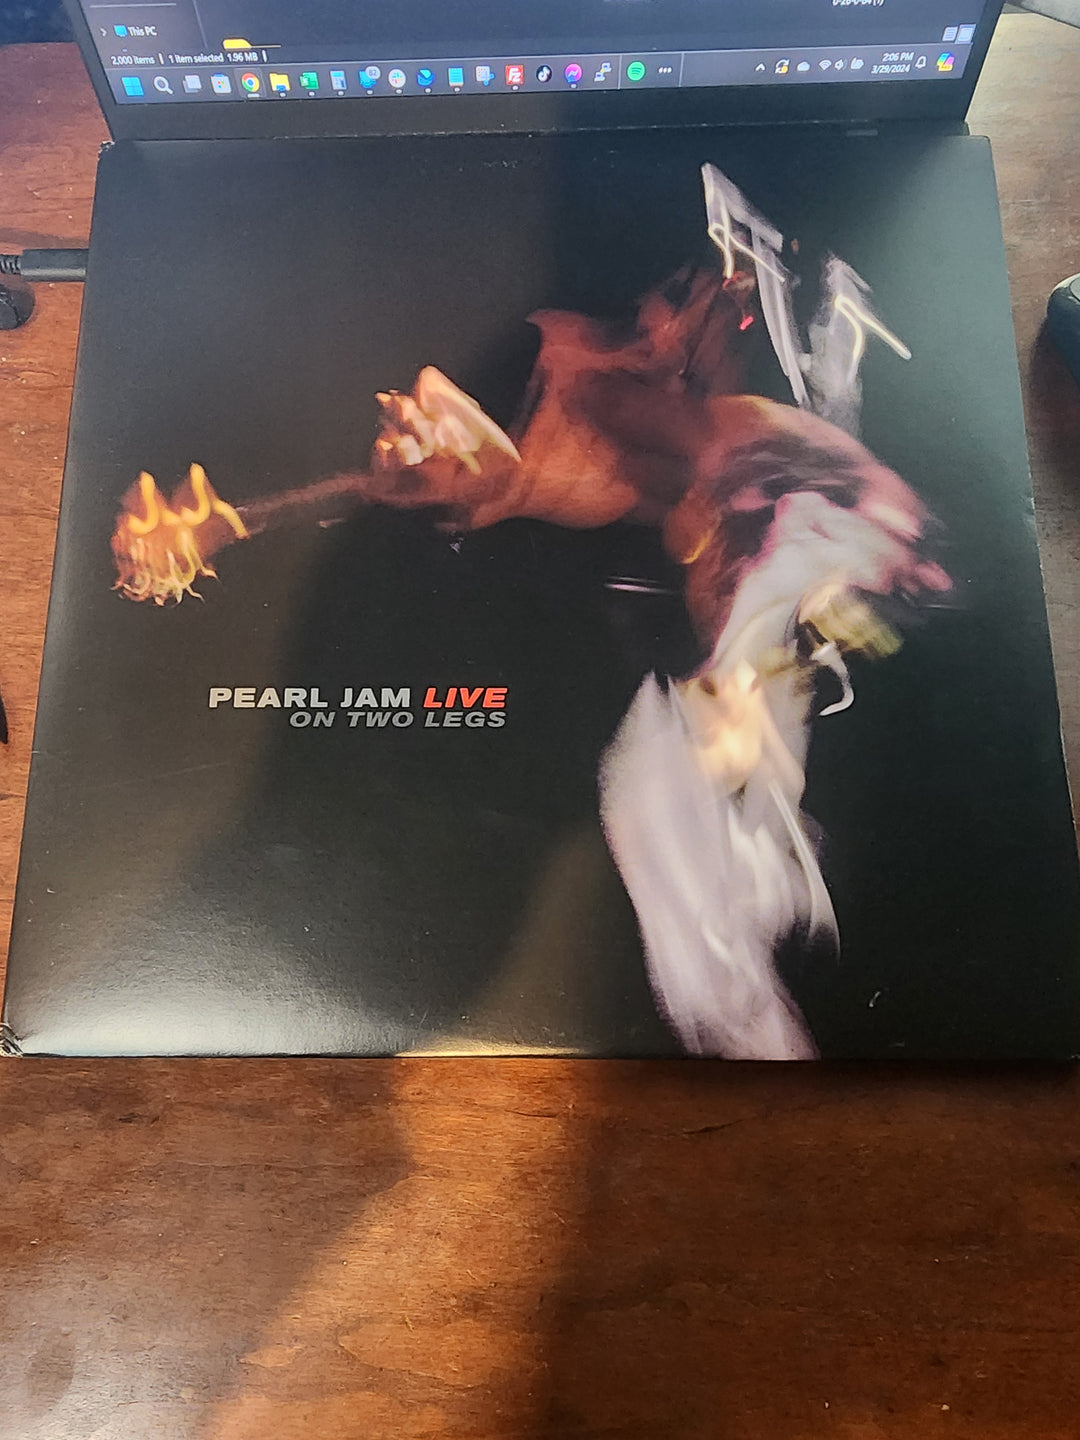 1998 Pearl Jam ‎Live On Two Legs 2LP Epic ‎Records E2 69752 VG+/VG